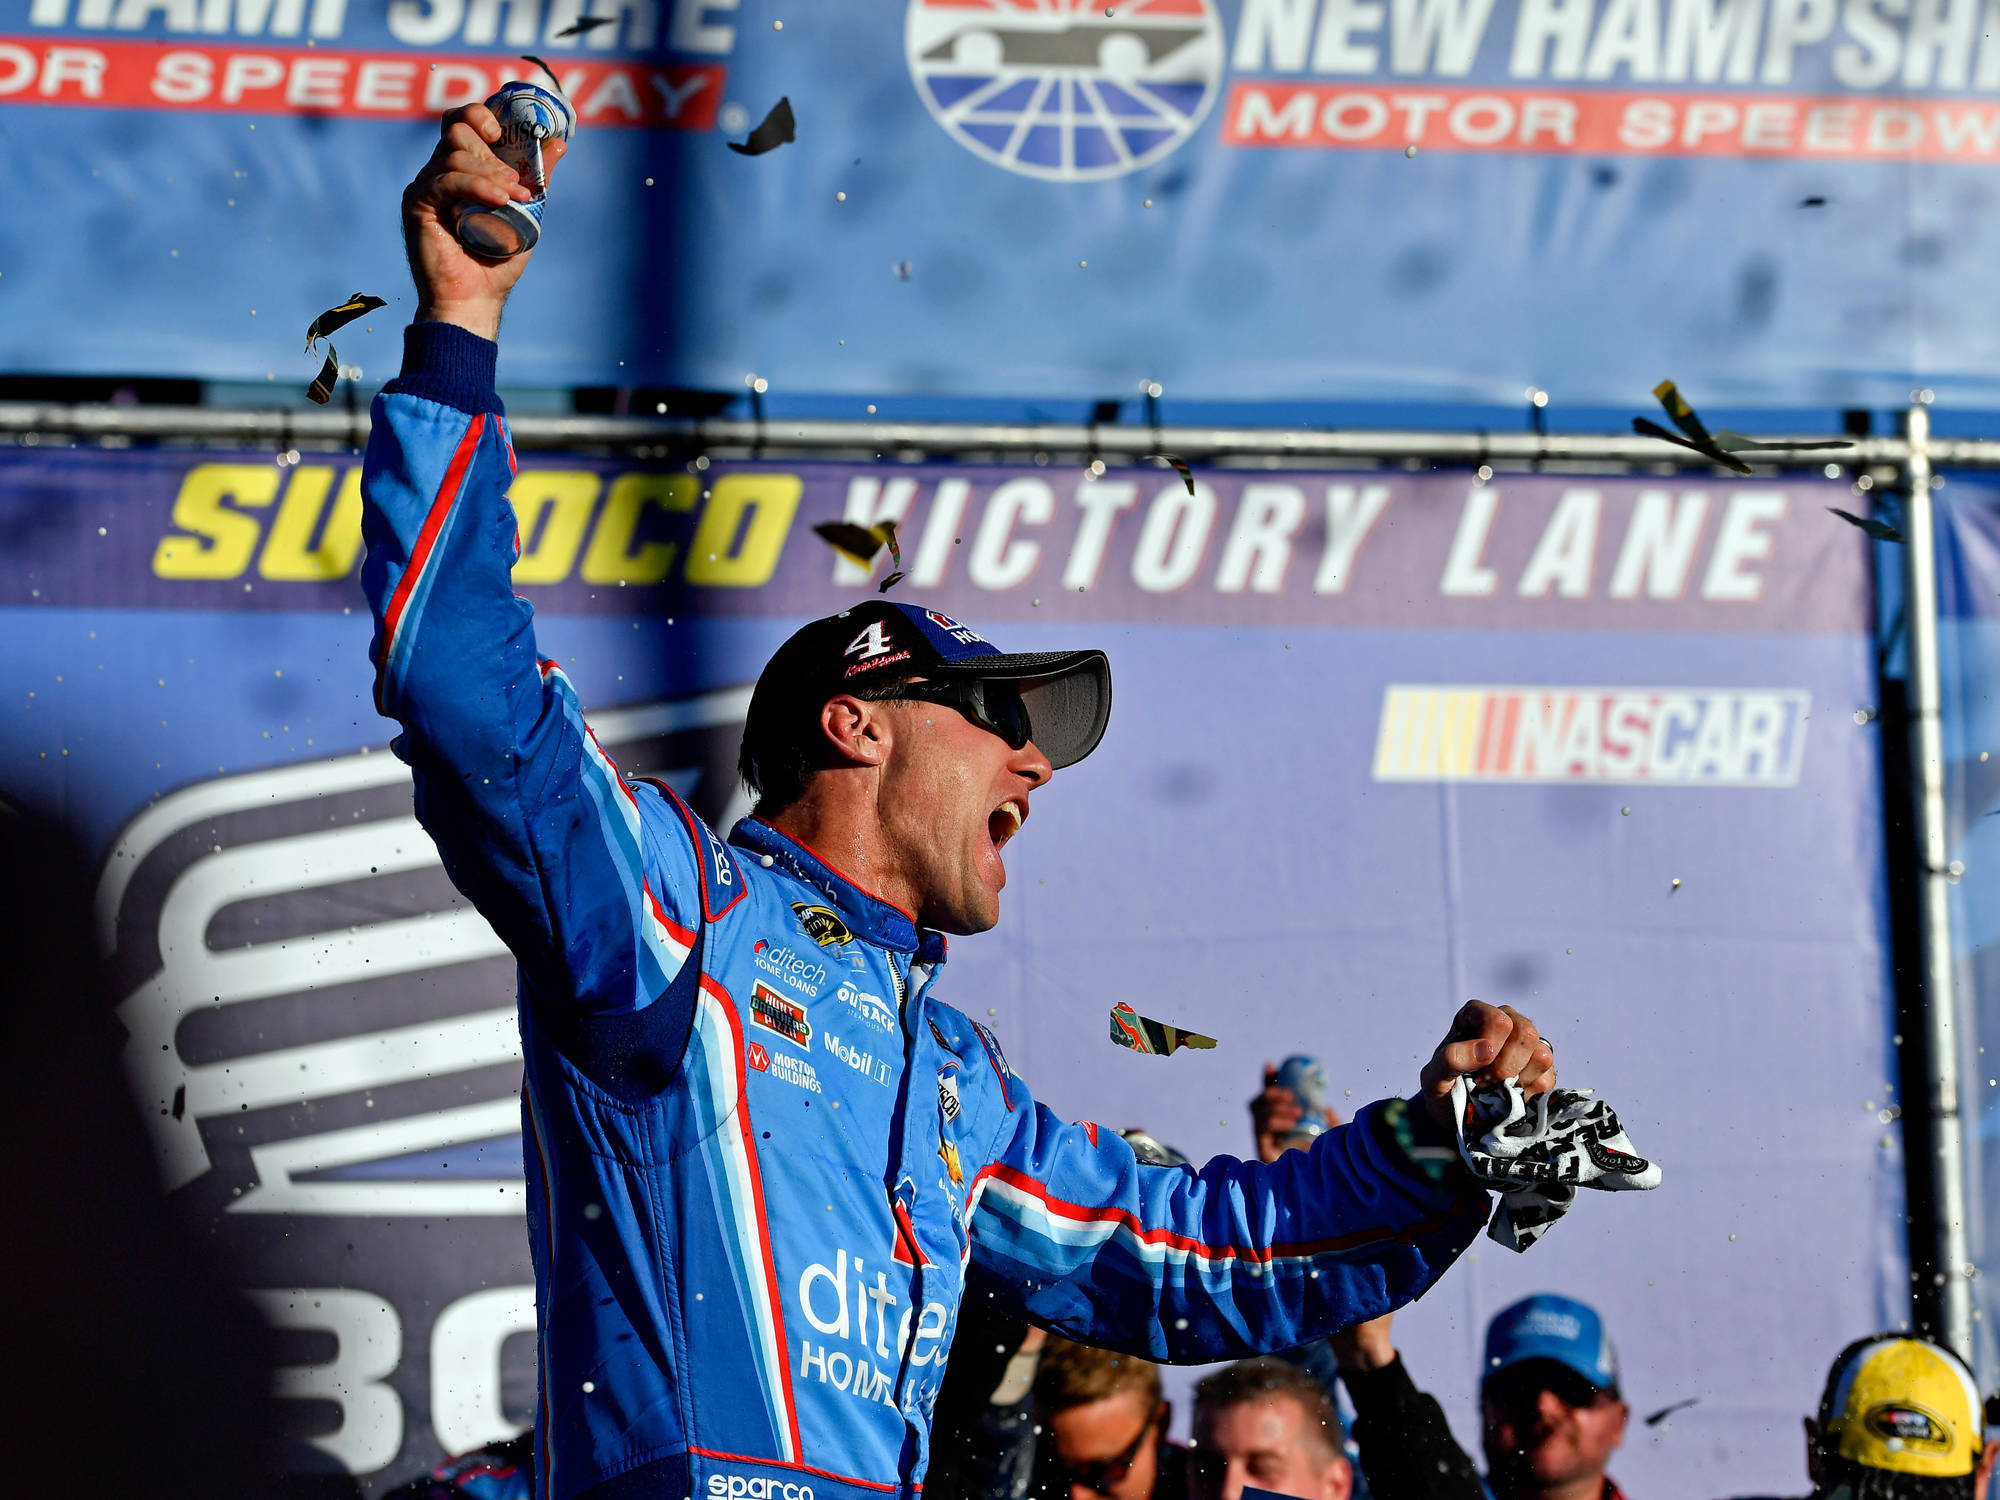 A Cut Above The Rest - Harvick is Happy At New Hampshire